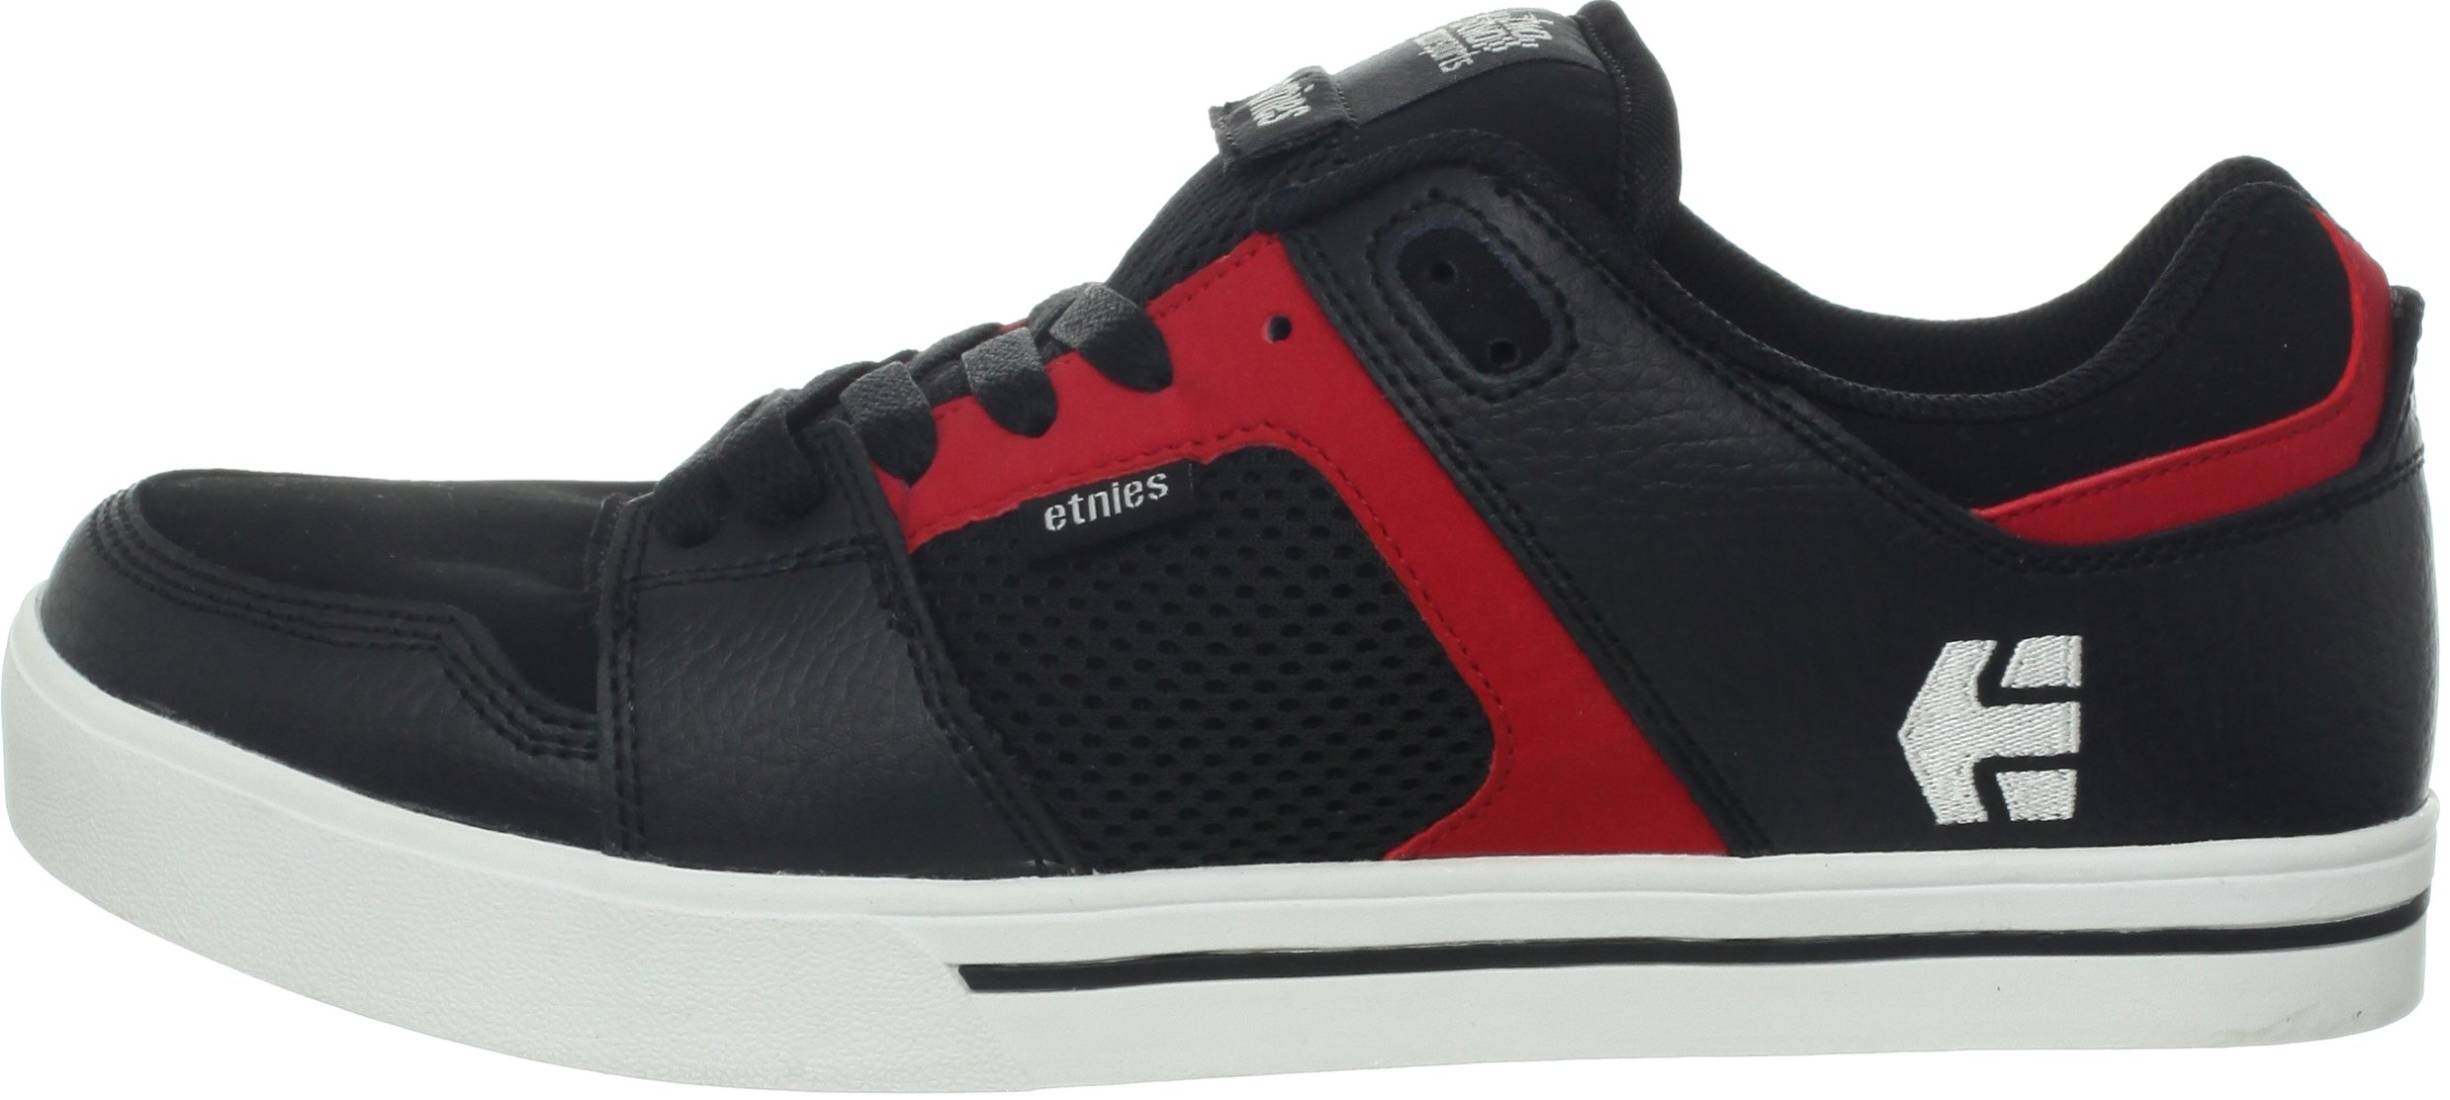 Only £45 + Review of Etnies Rockfield | RunRepeat